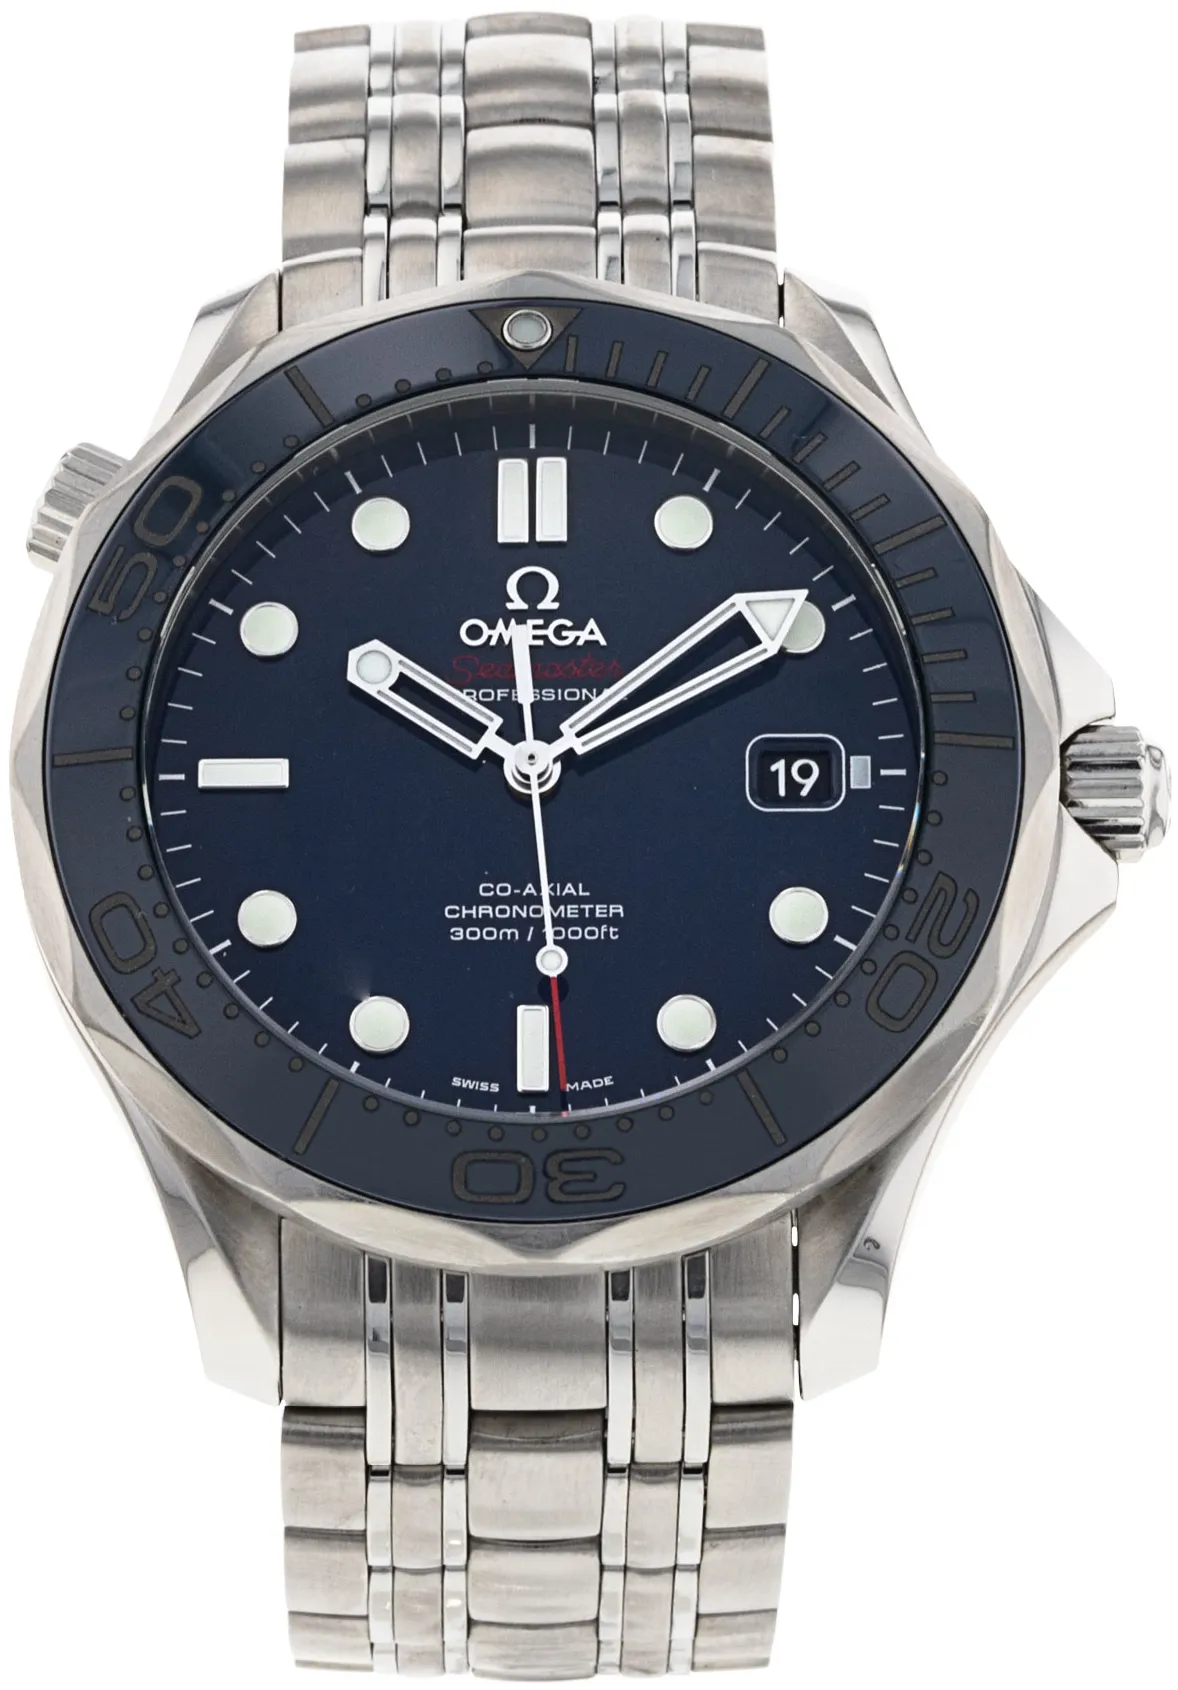 Omega Seamaster Diver 300M 212.30.41.20.03.001 41mm Stainless steel Blue